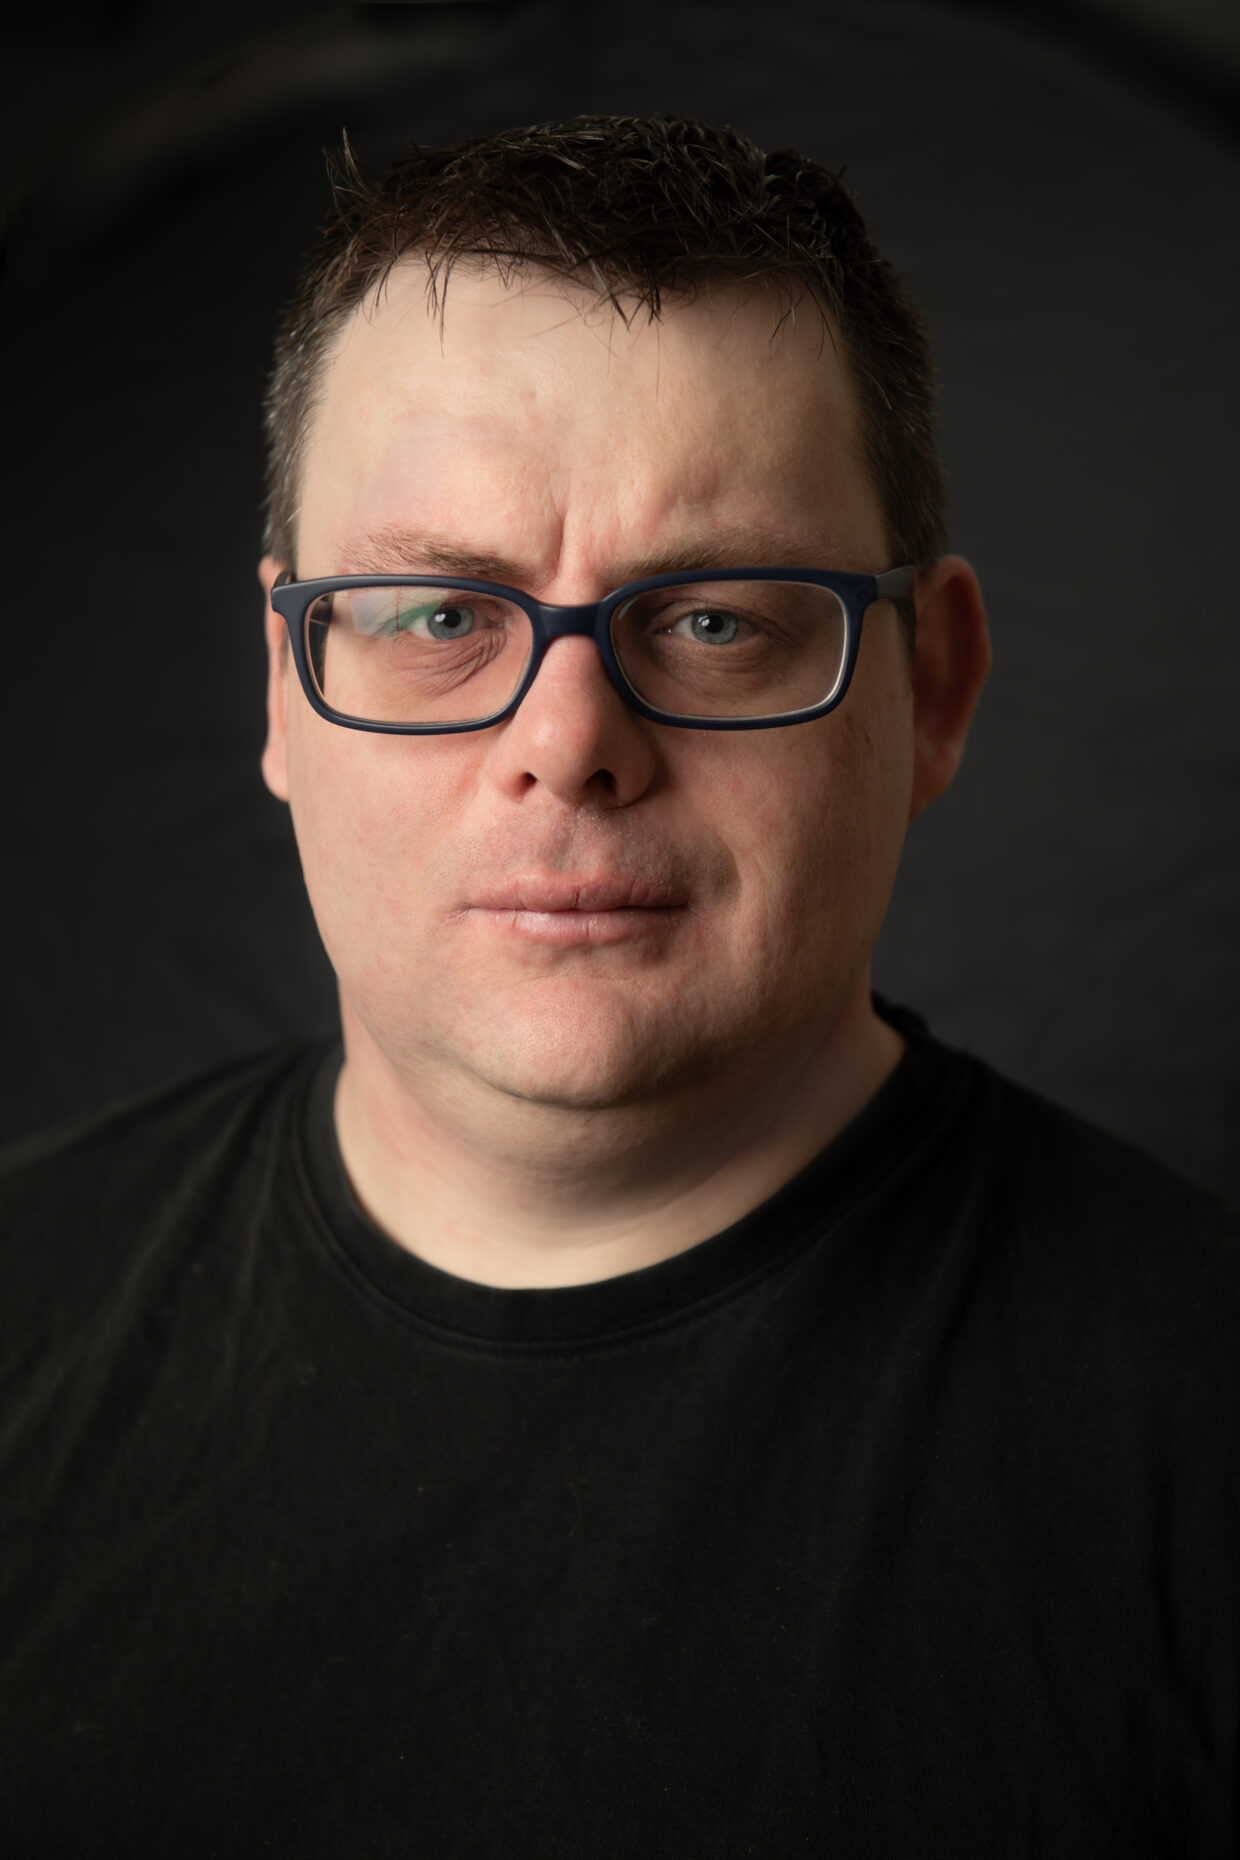 A promotion shot of Pete. Pete is wearing glasses and a black tshirt. He has short black hair and is standing against a black background.